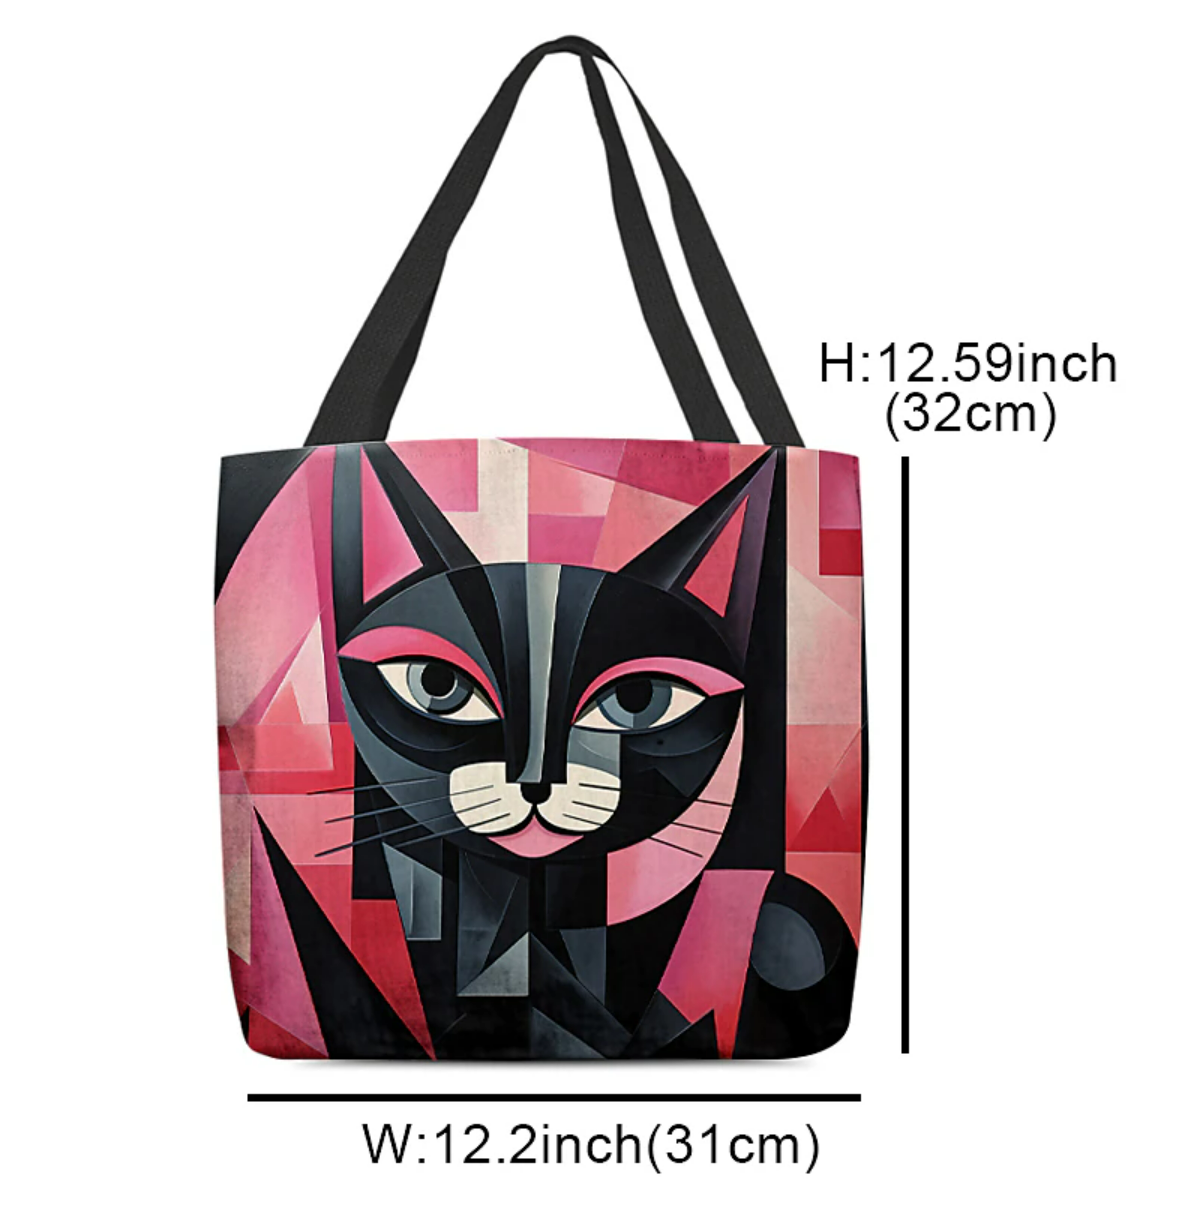 Women's Tote Shoulder Bag Canvas Tote Bag Polyester Shopping Holiday Print Large Capacity Foldable Lightweight Cat Black / Red Light Pink Light Red